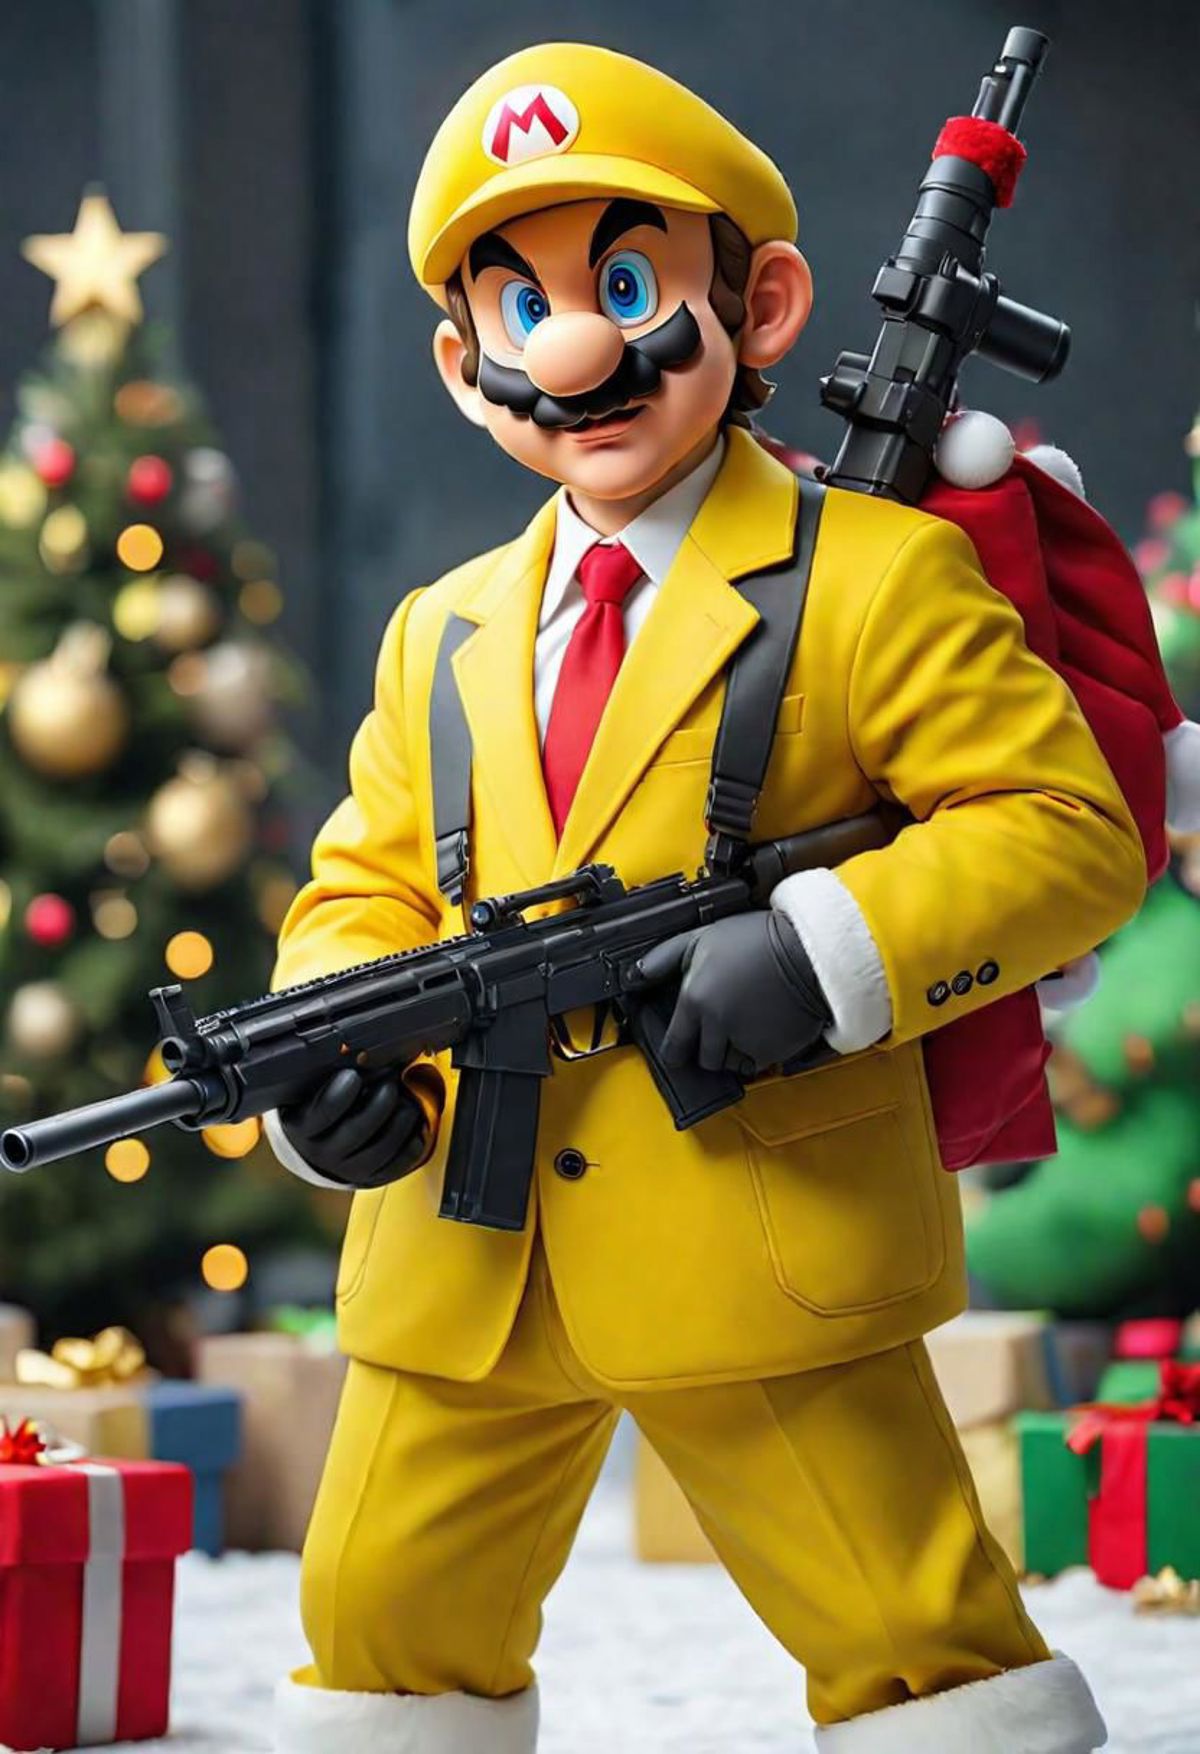 A Mario character holding a gun and wearing a yellow suit with a red tie.